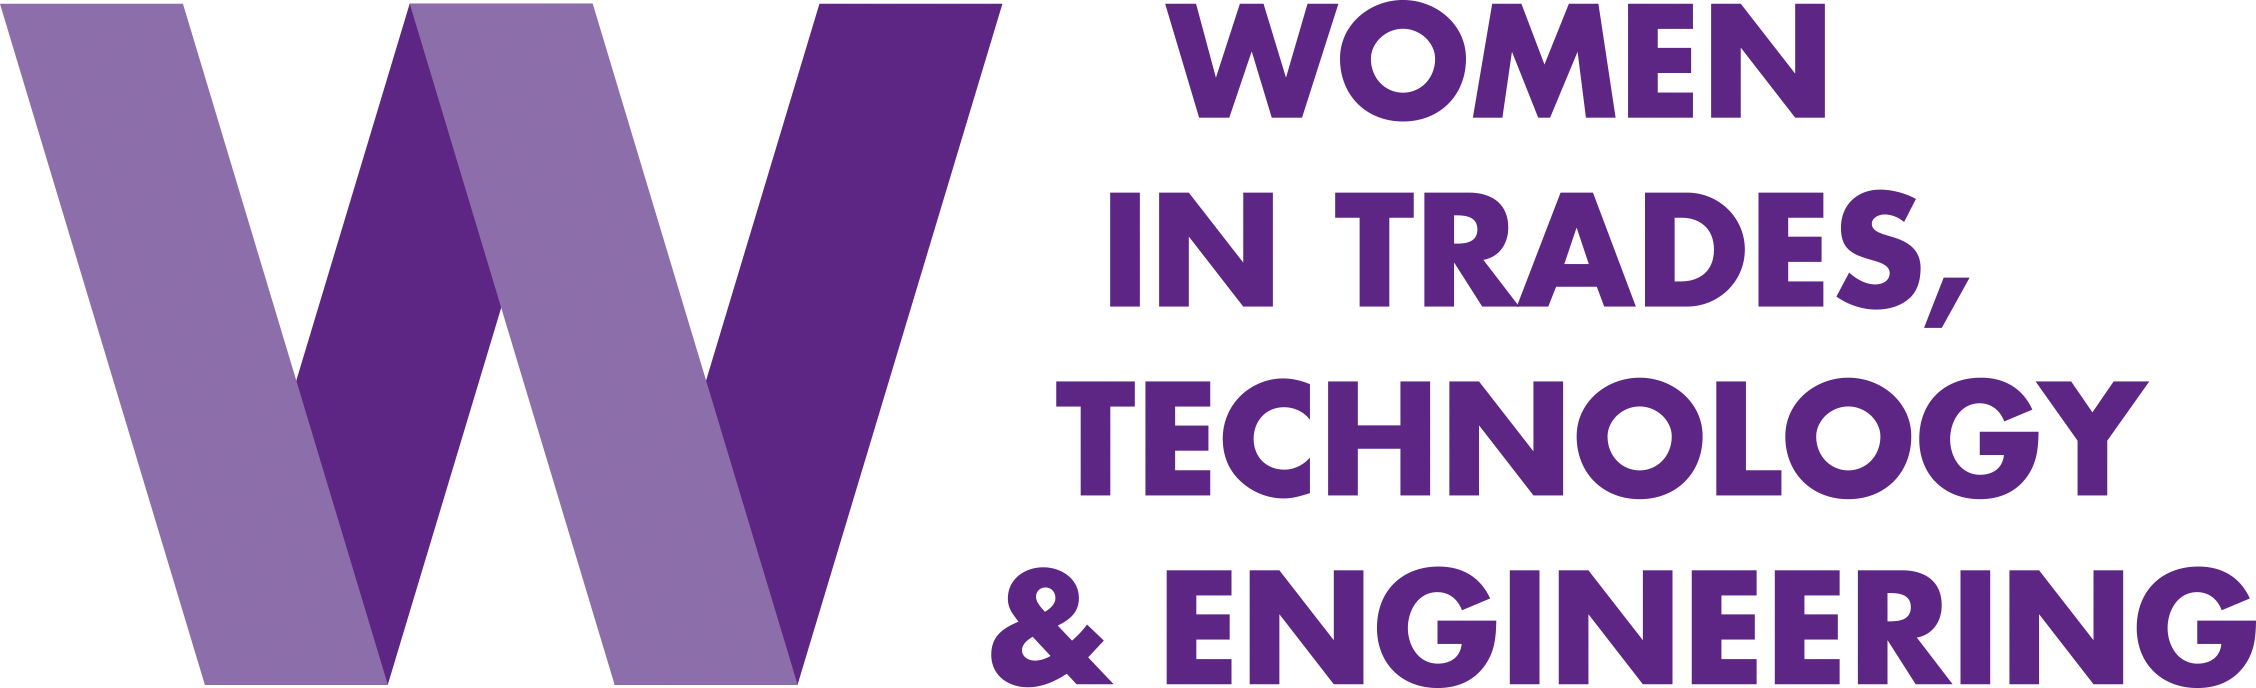 image of the WTTE logo